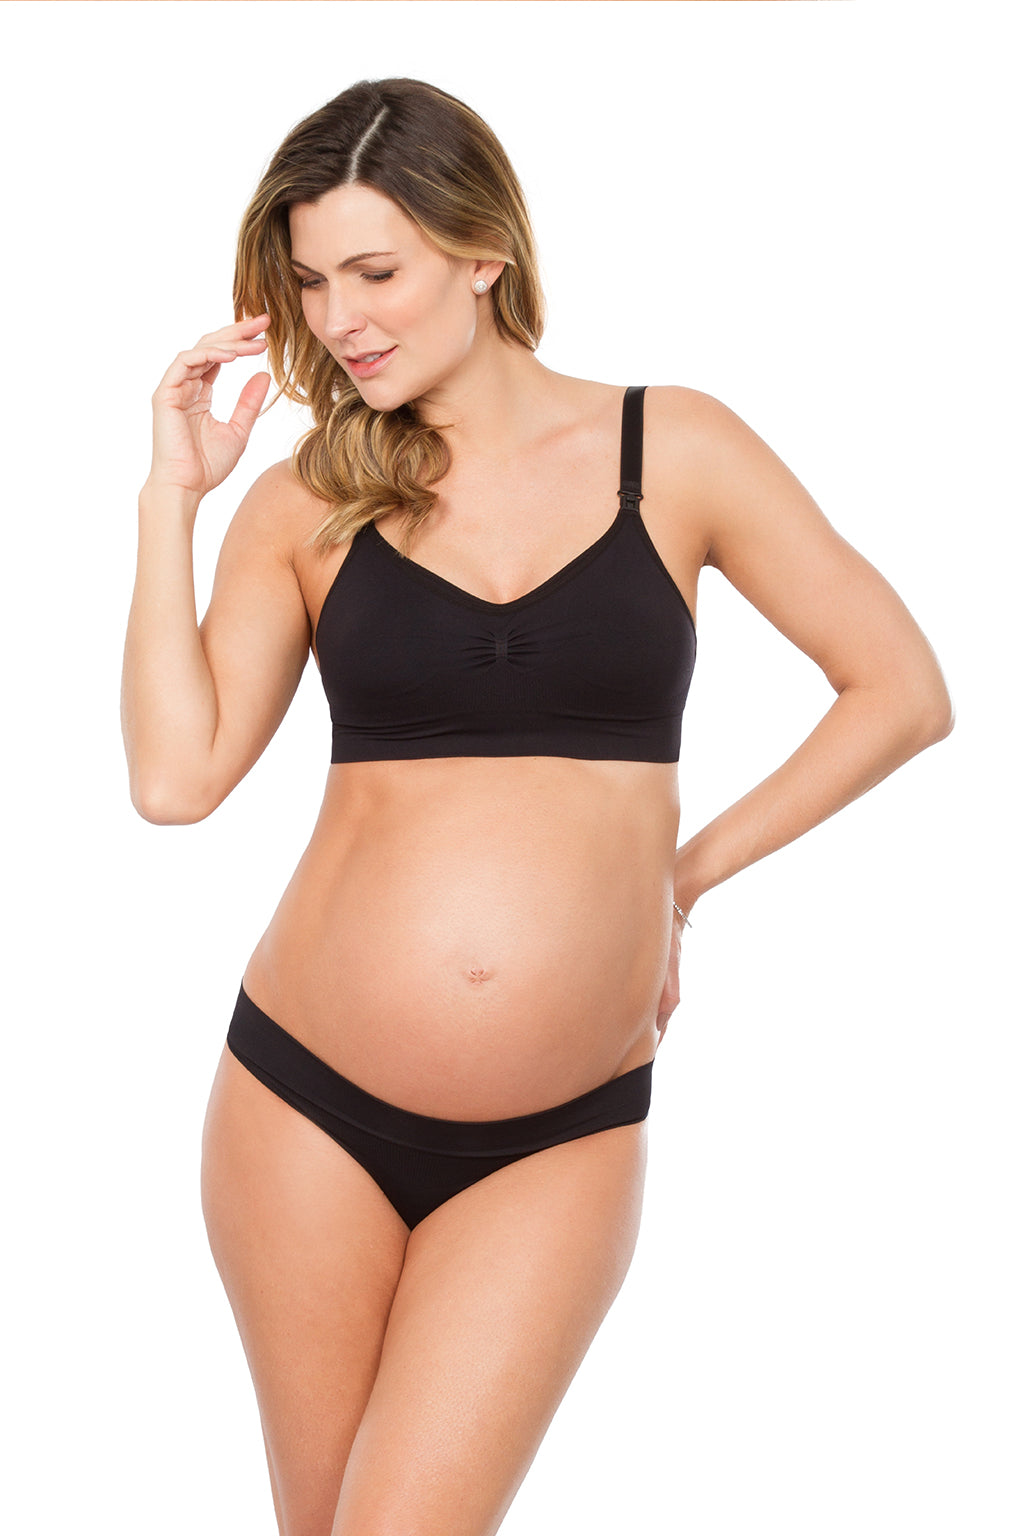 Maternity lingerie: how to choose the right underwear - Metro Brazil Blog